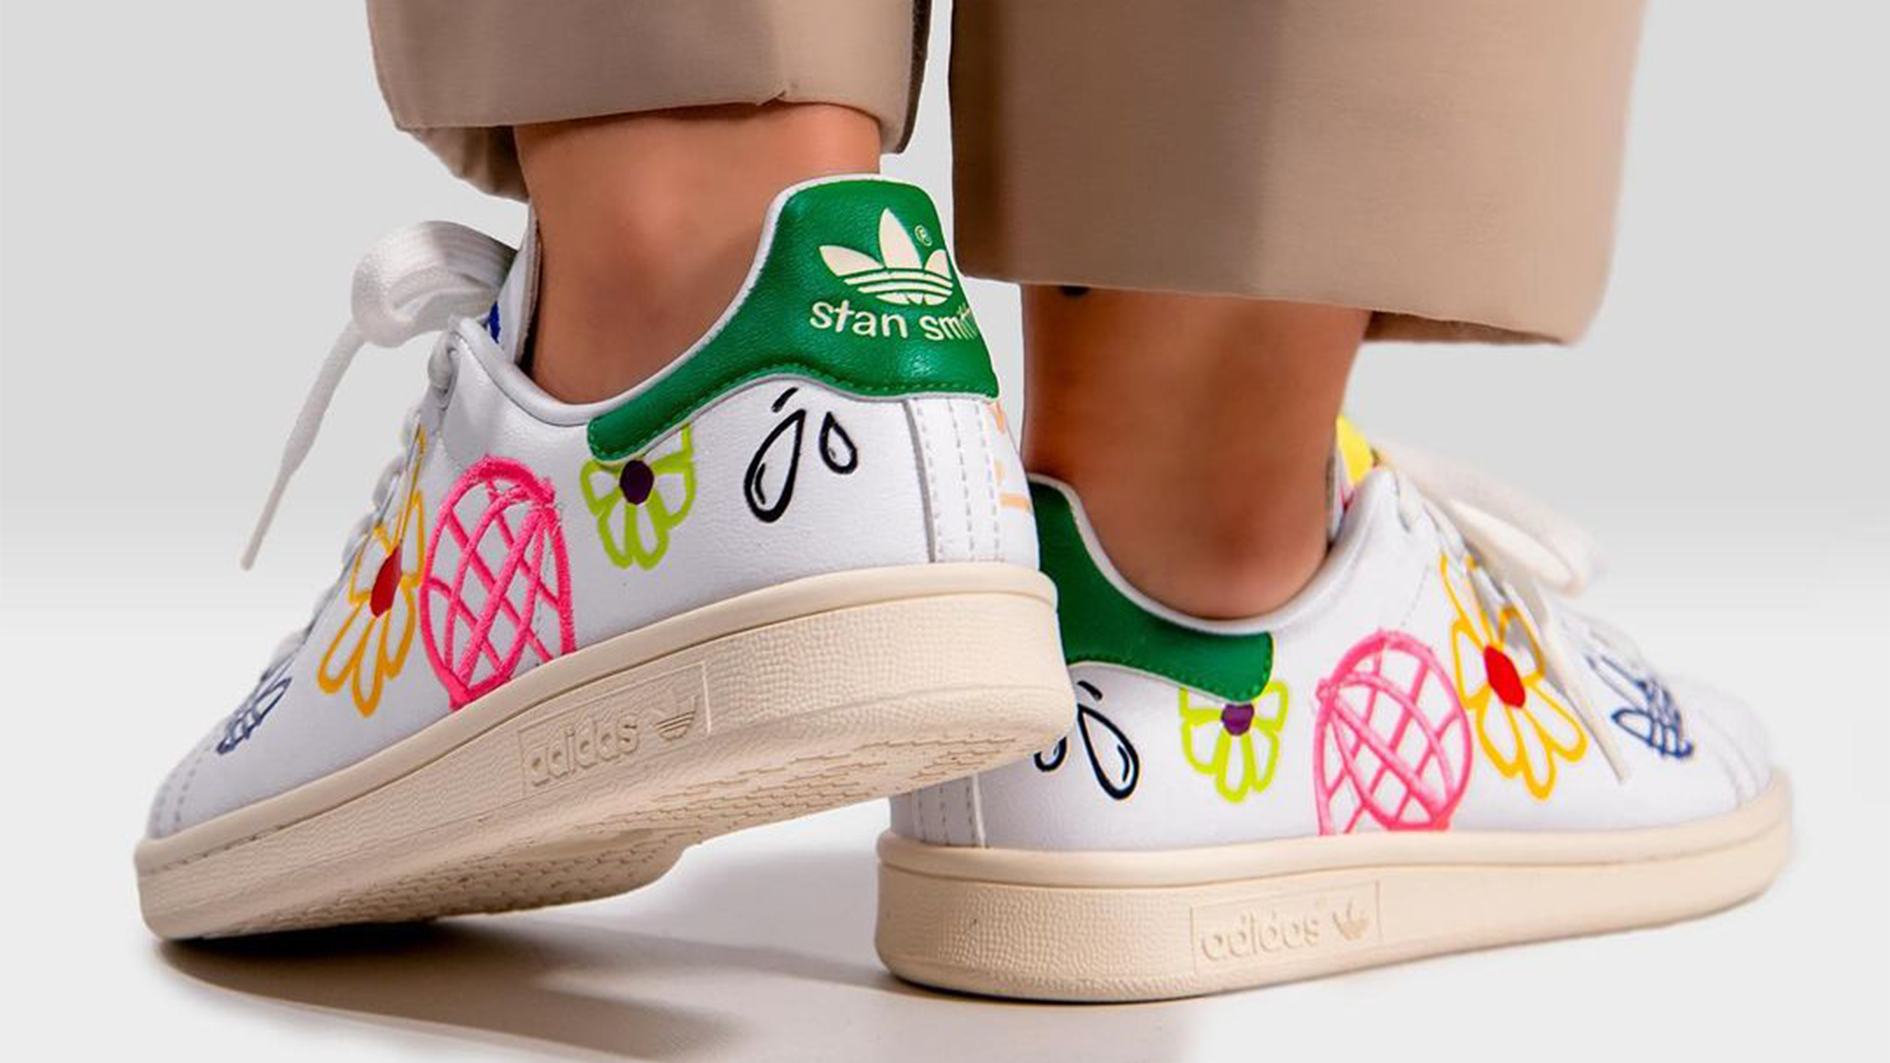 Reserveren Arashigaoka Laag adidas Stan Smith Sizing: How Do They Fit? | The Sole Supplier